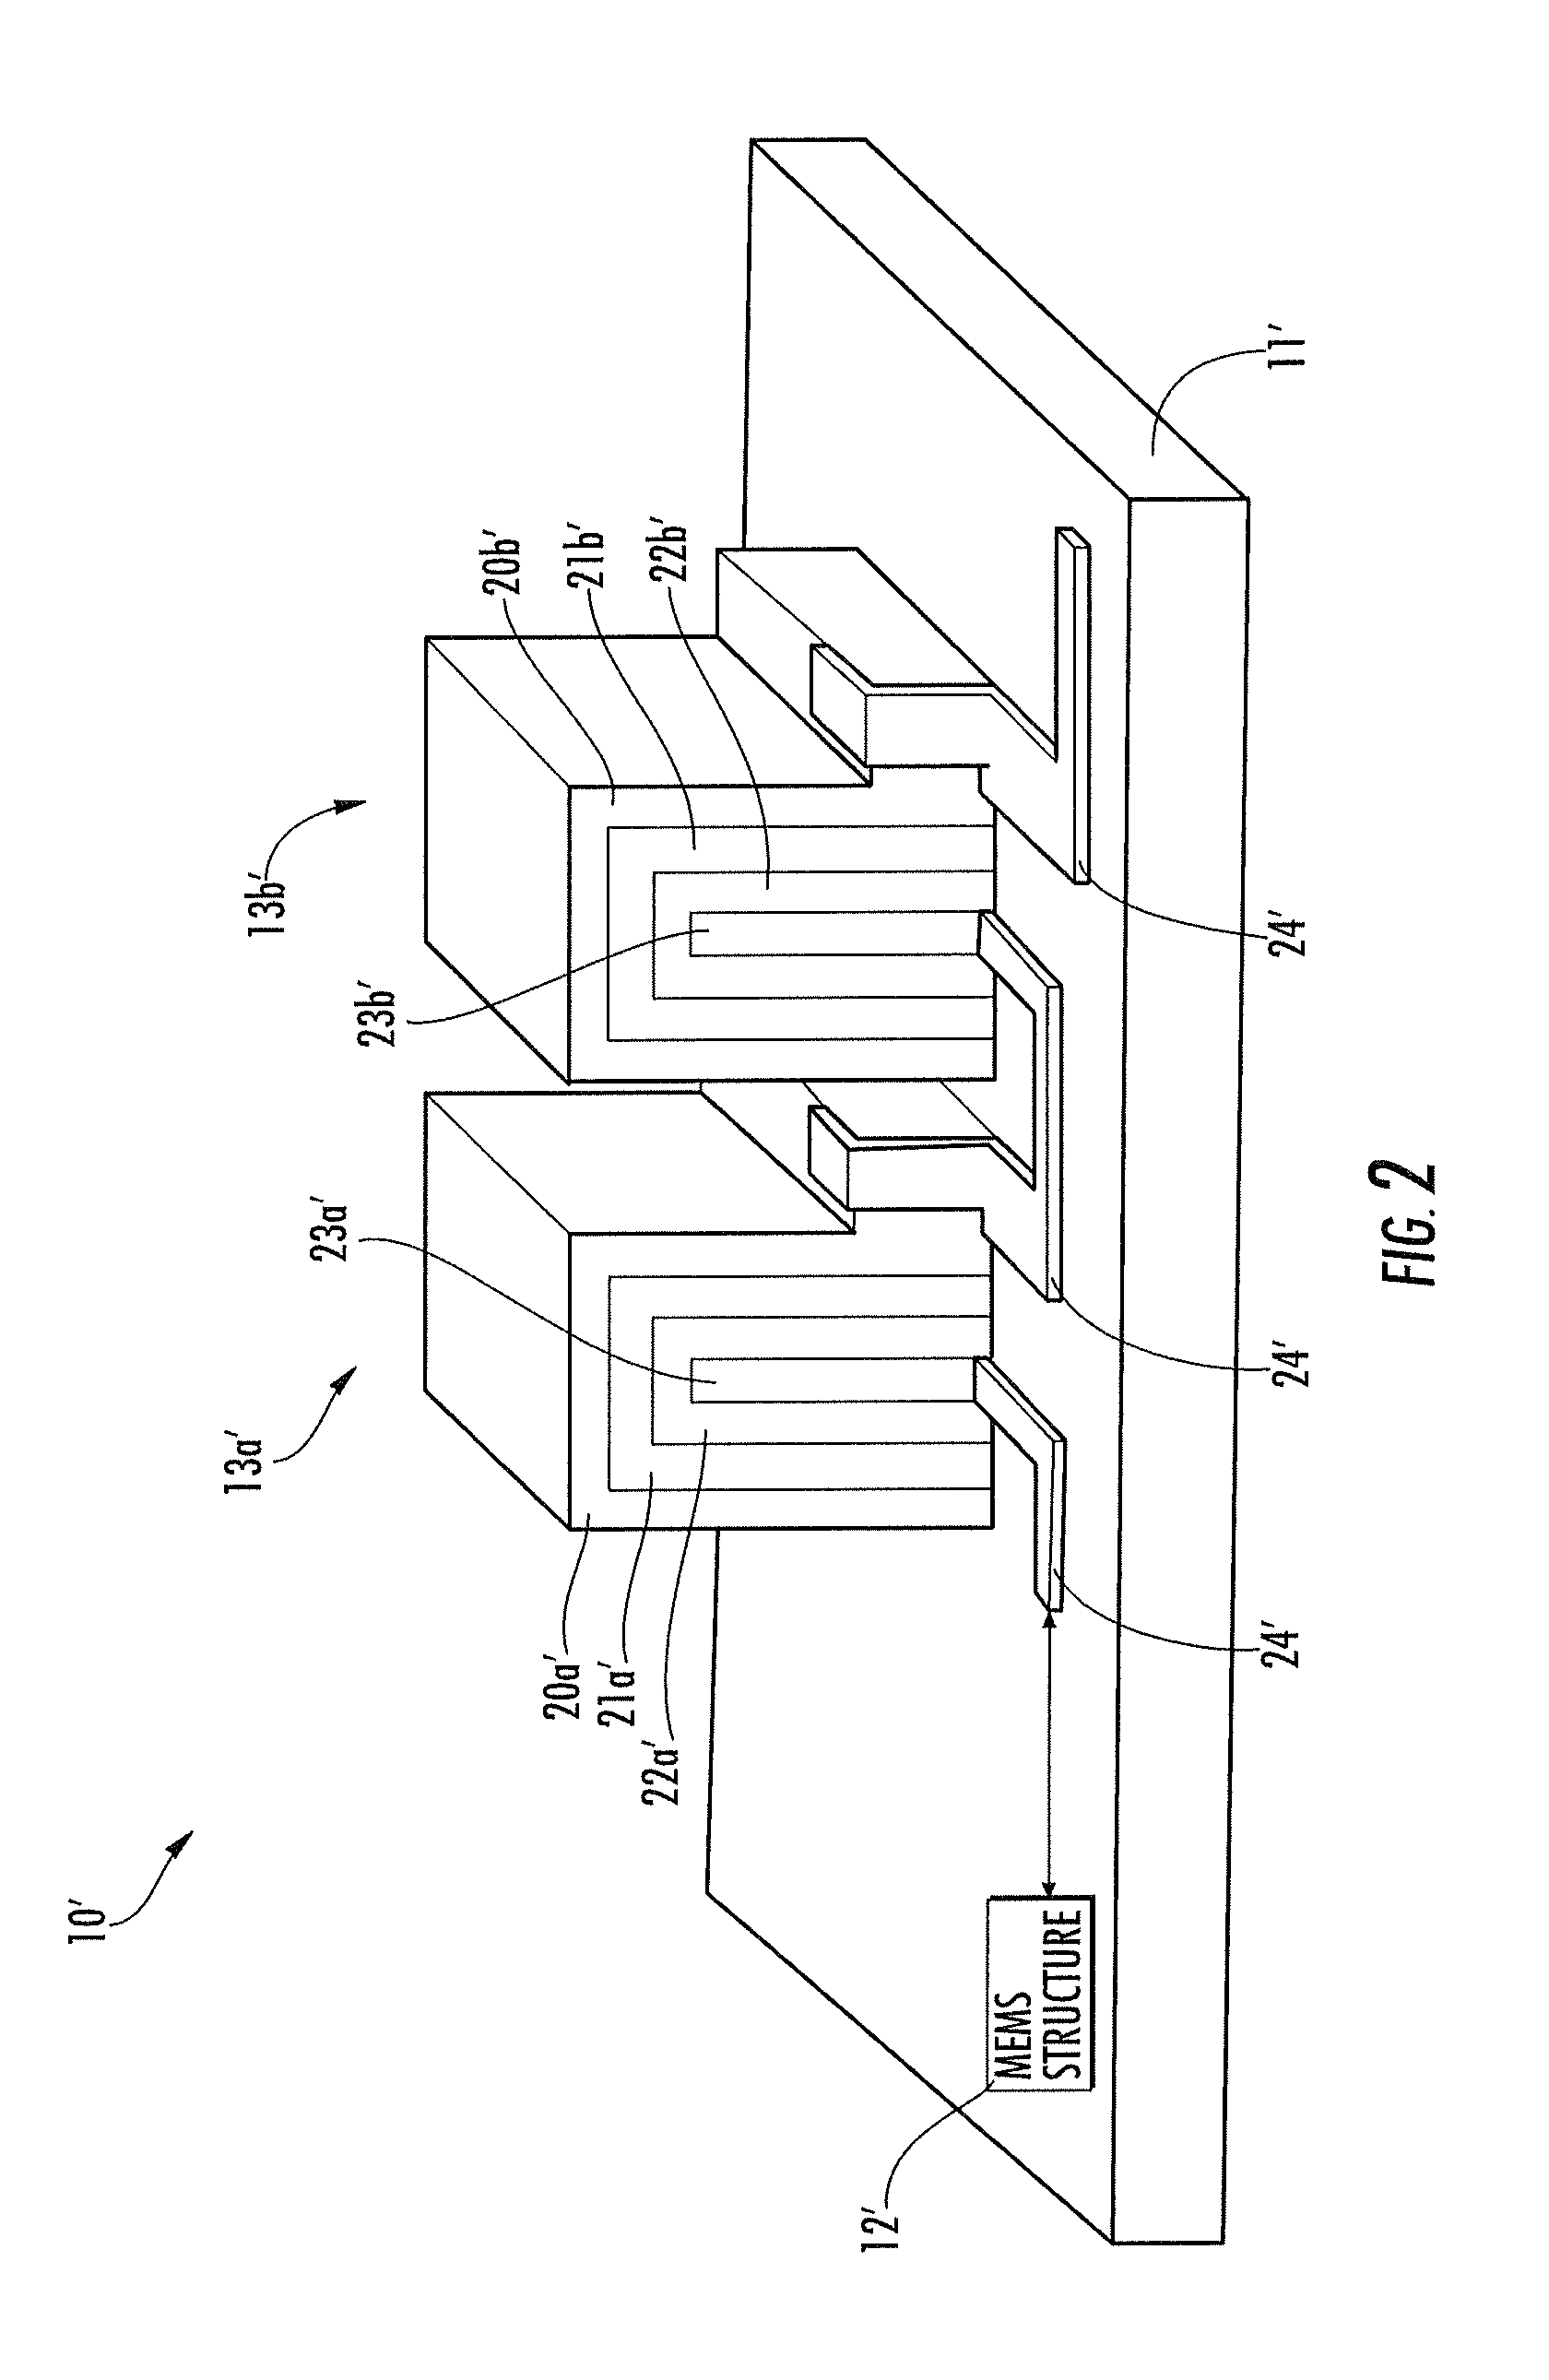 Battery cell for MEMS device and related methods